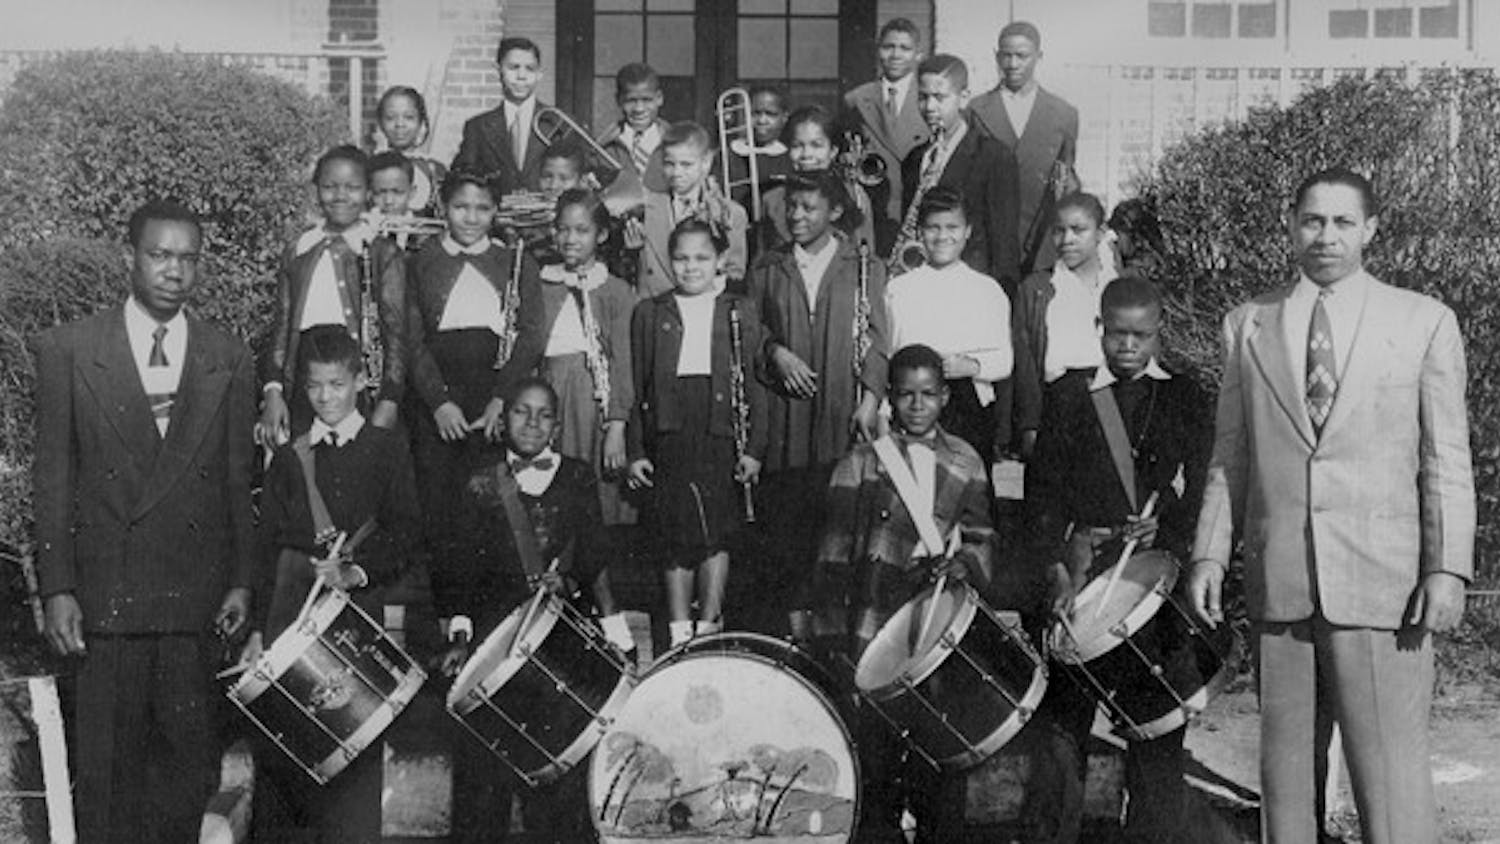 	The Northside Elementary band in 1951.